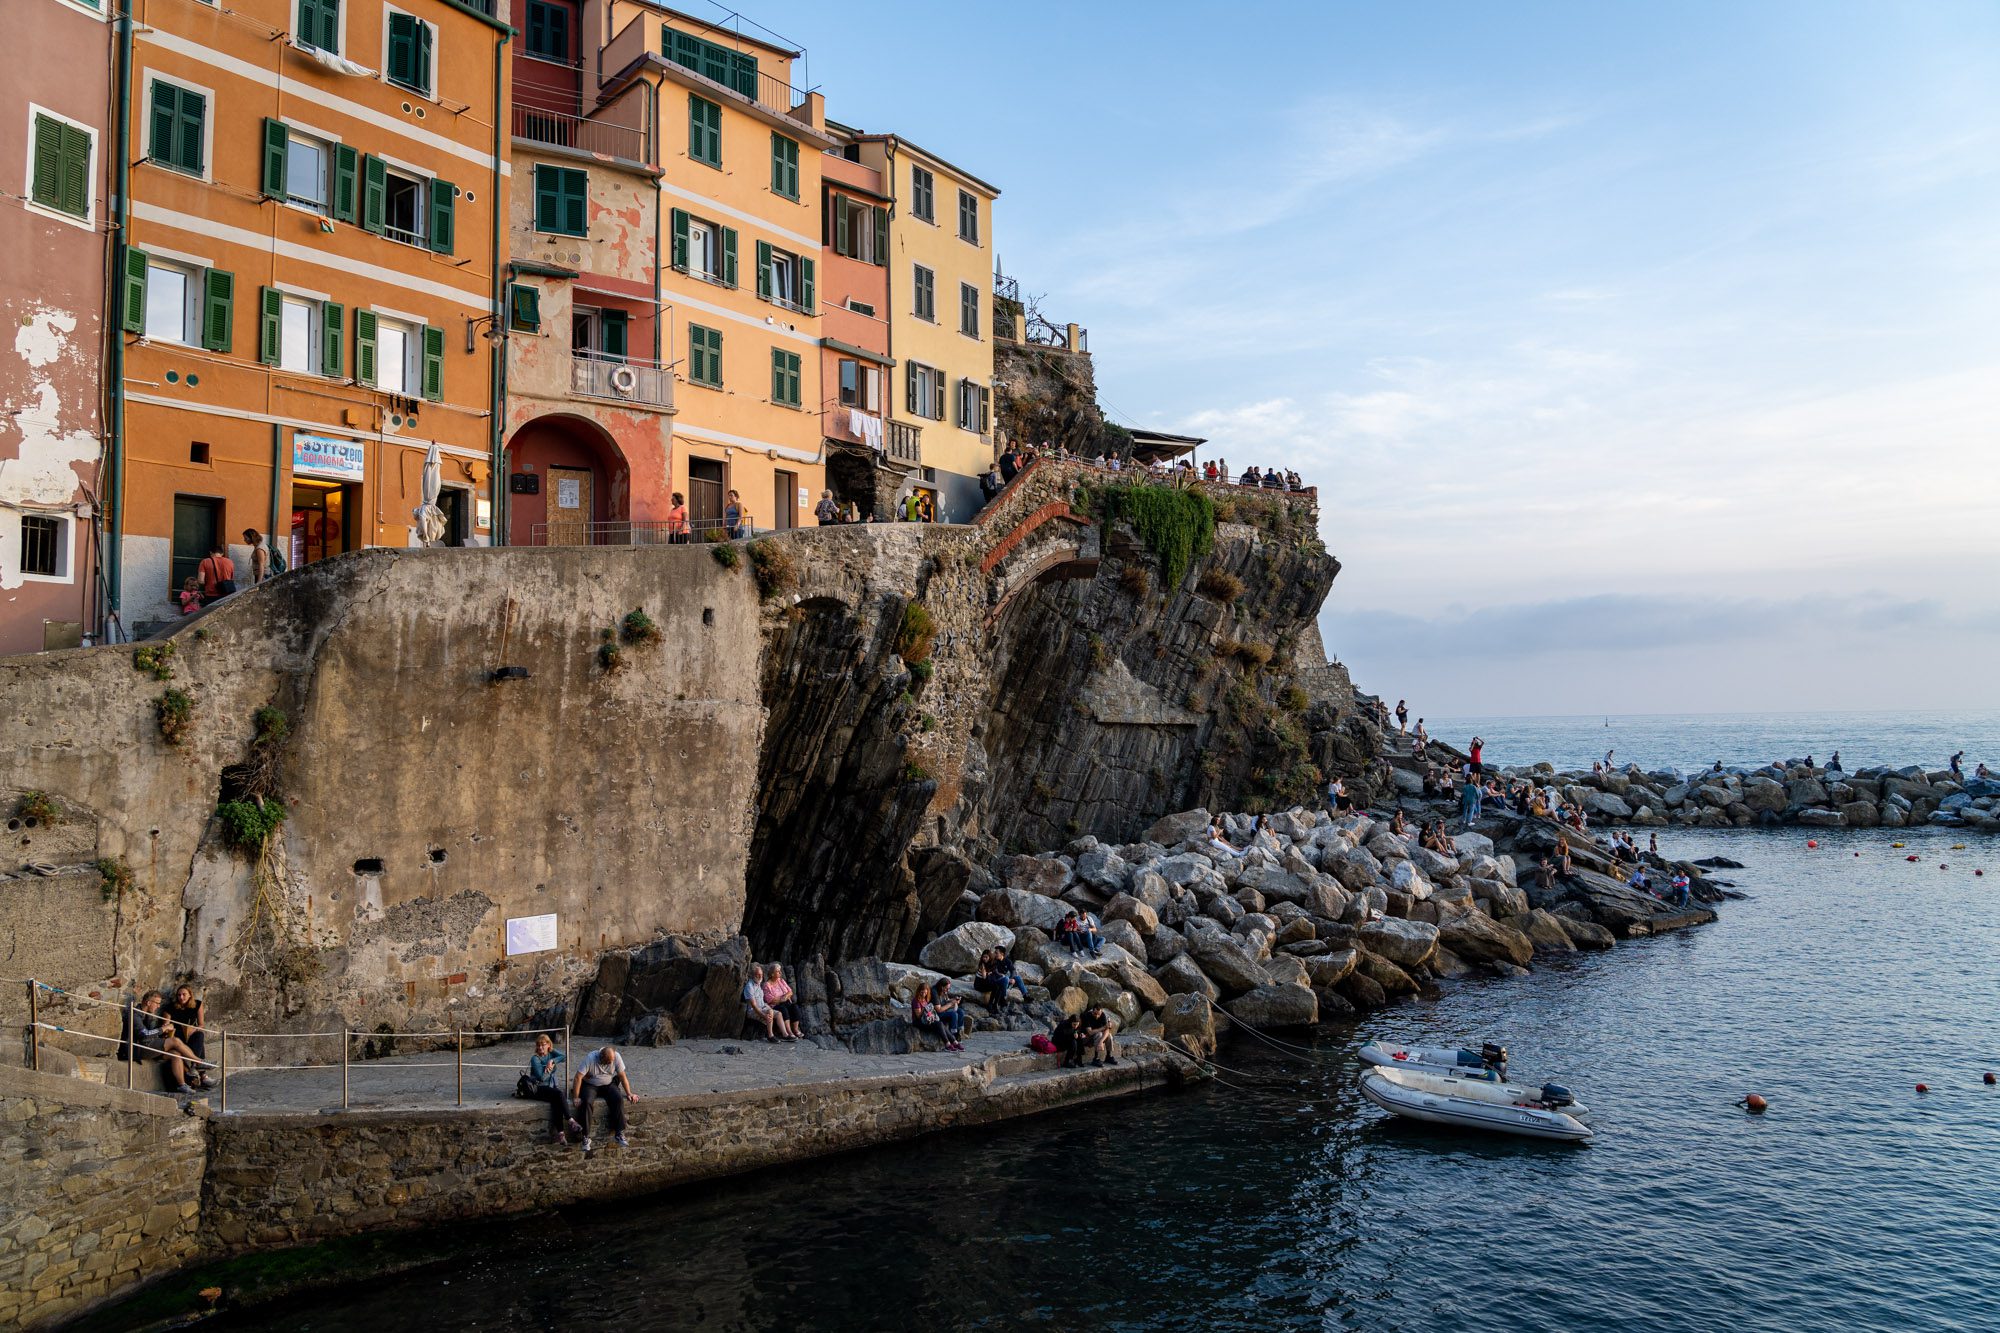 The Best Things to Do in Cinque Terre: Complete Guide